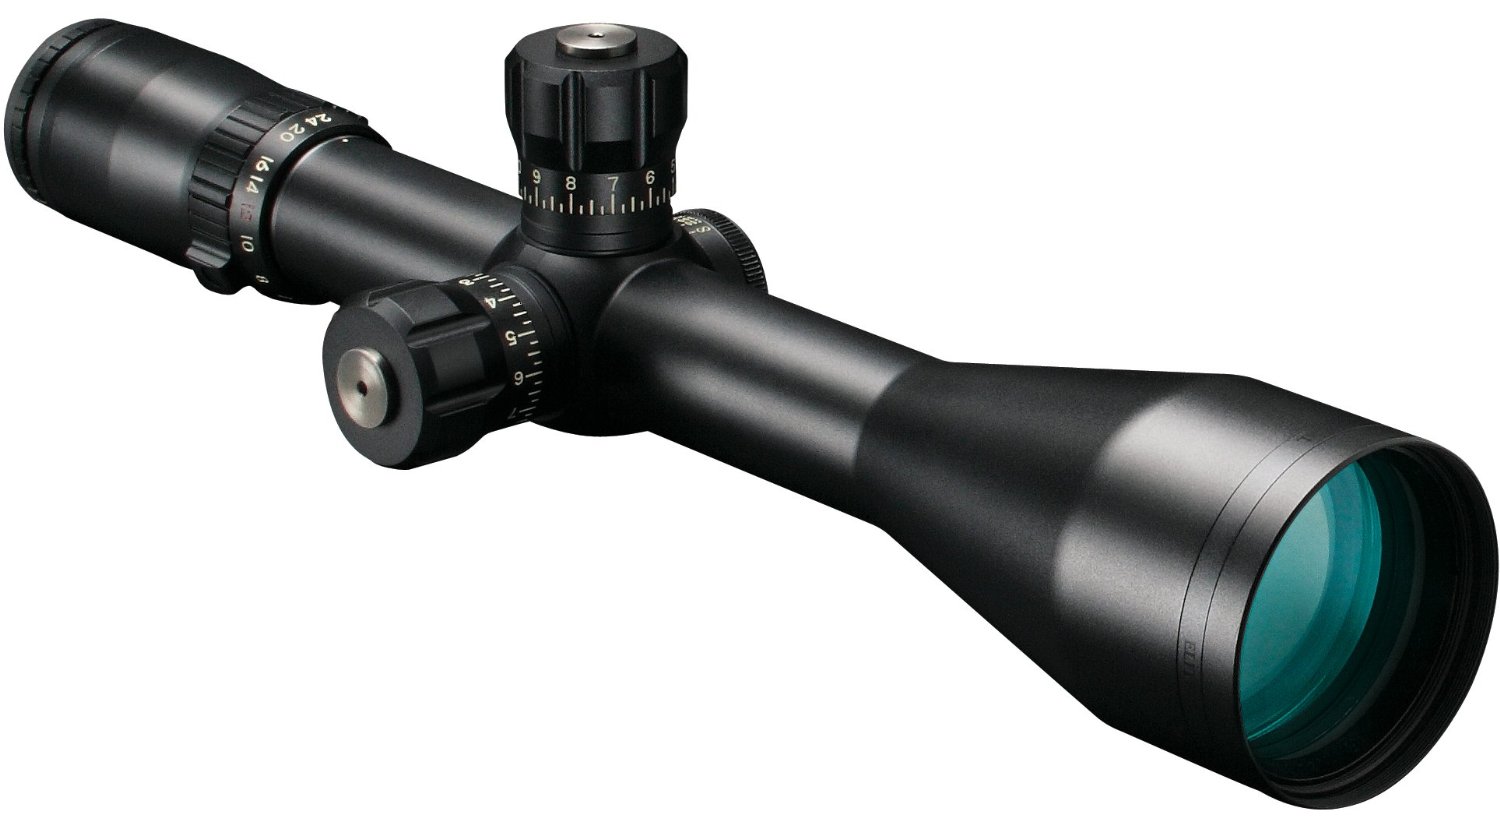 The Best Sniper Scopes For The Money